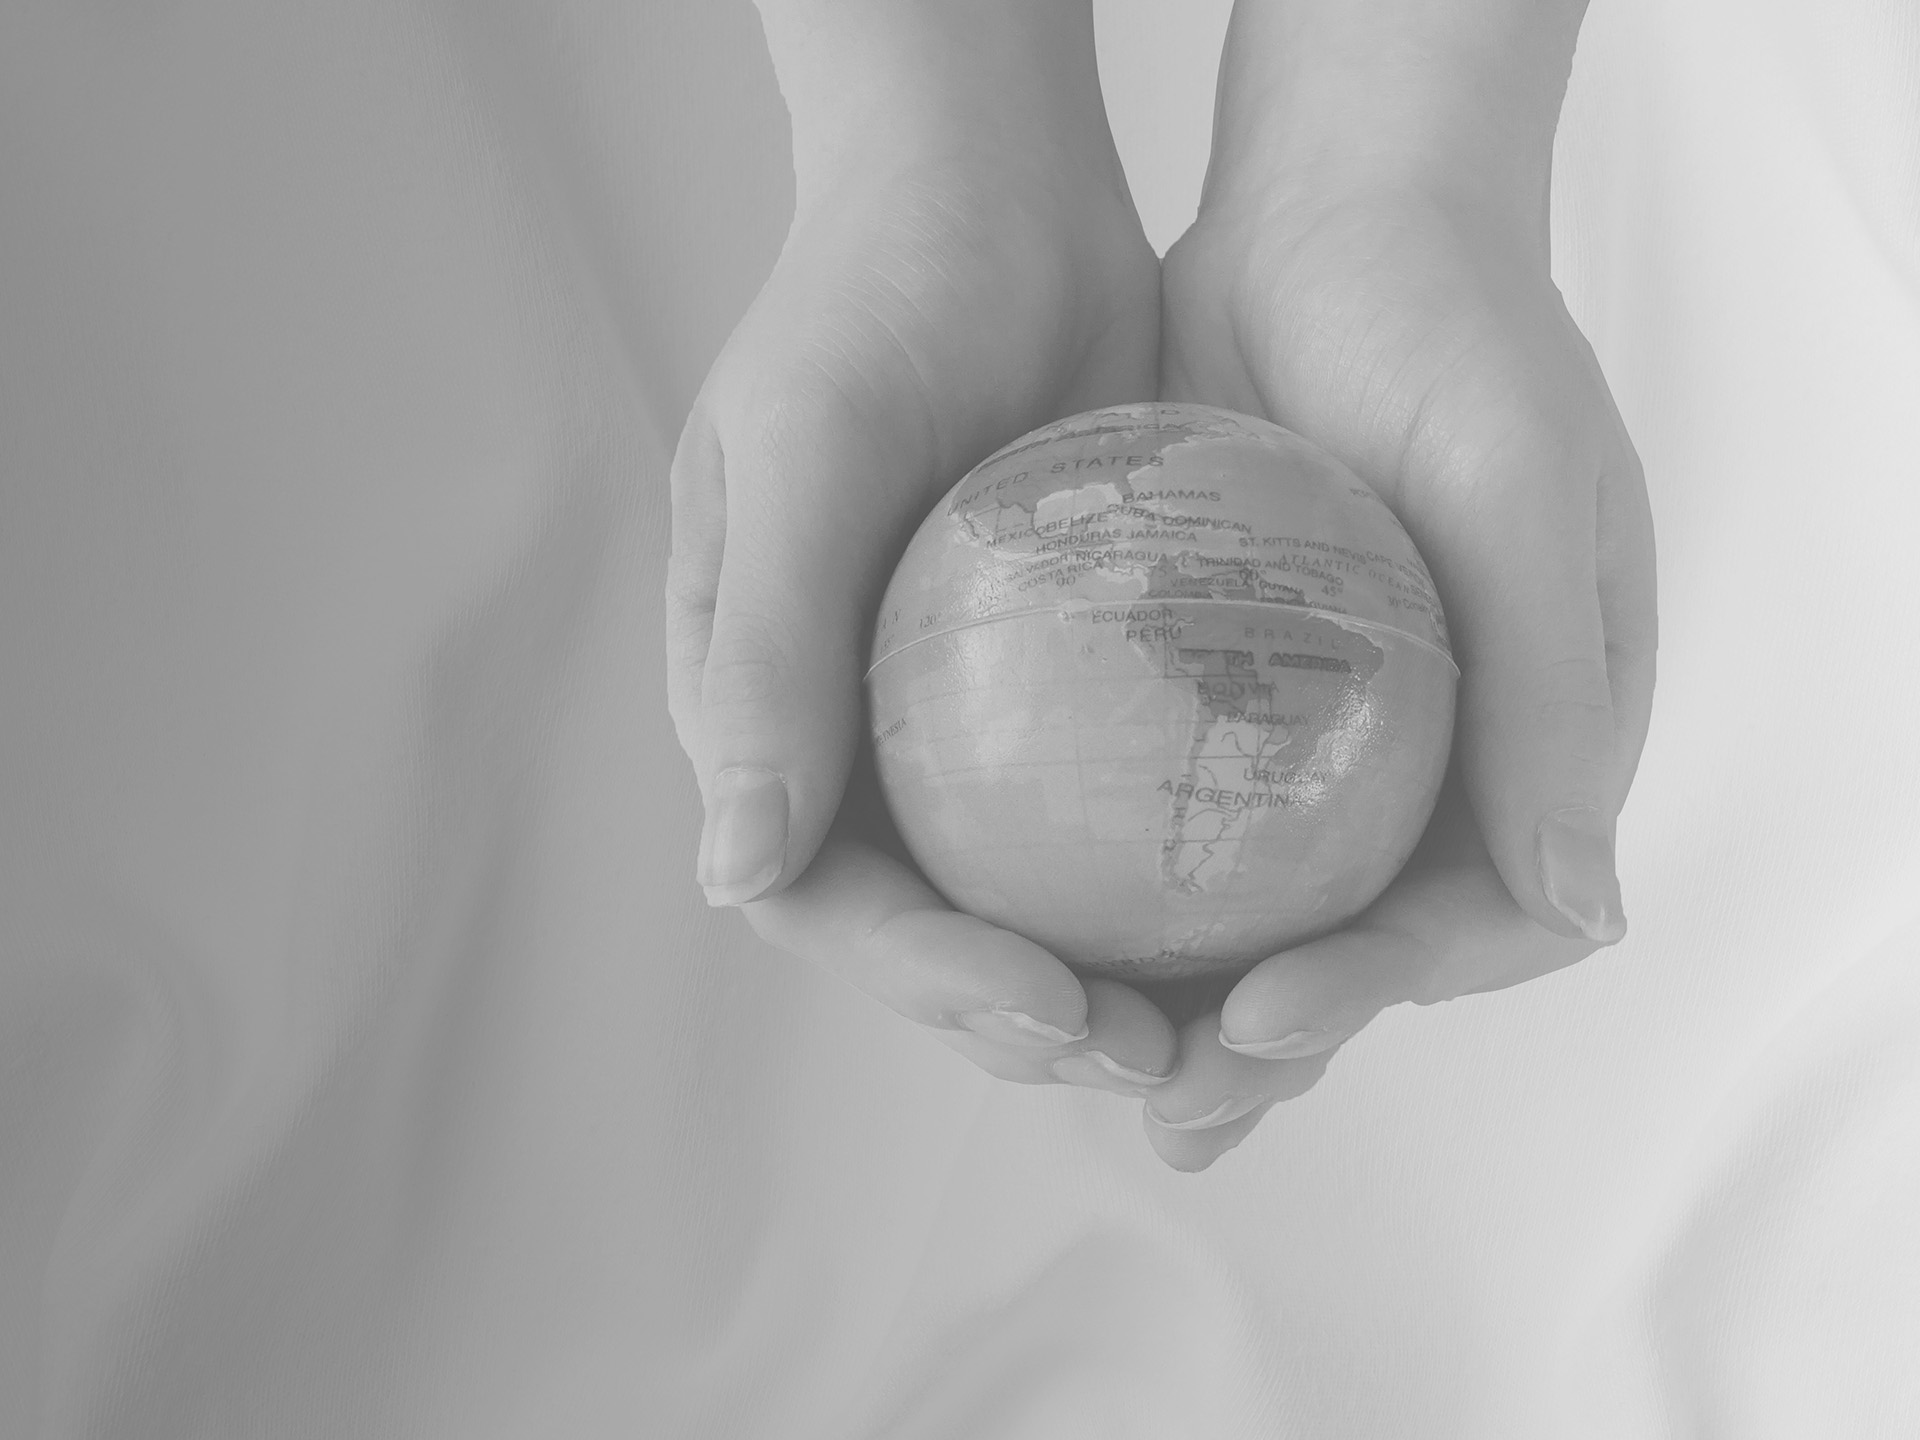 Two hands holding a small globe